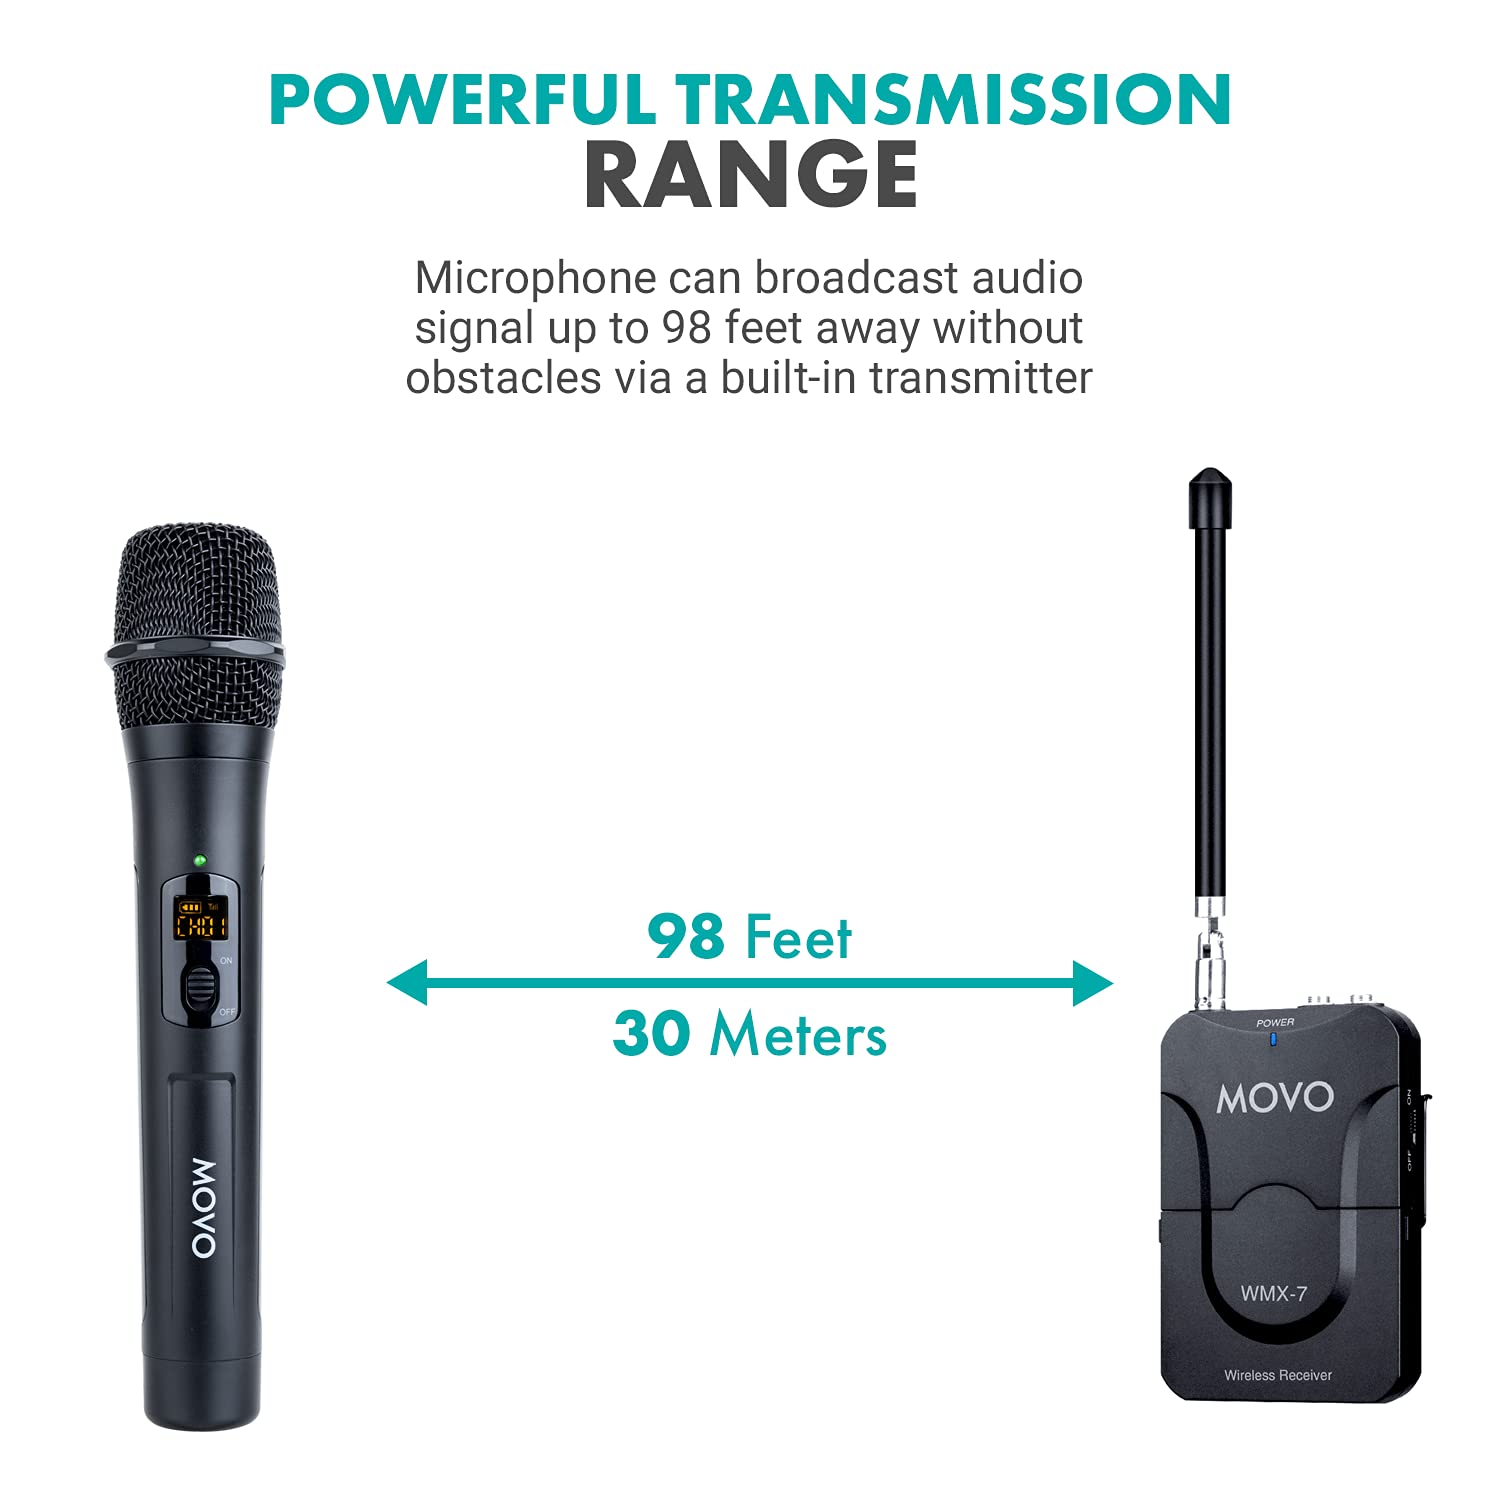 Movo WMX-7-TH VHF Portable Handheld Microphone Transmitter for The WMX-7 Wireless Microphone System - 12-Channel Wireless Mic Best Wireless Microphones for Weddings, Interviews, Presentations  - Very Good